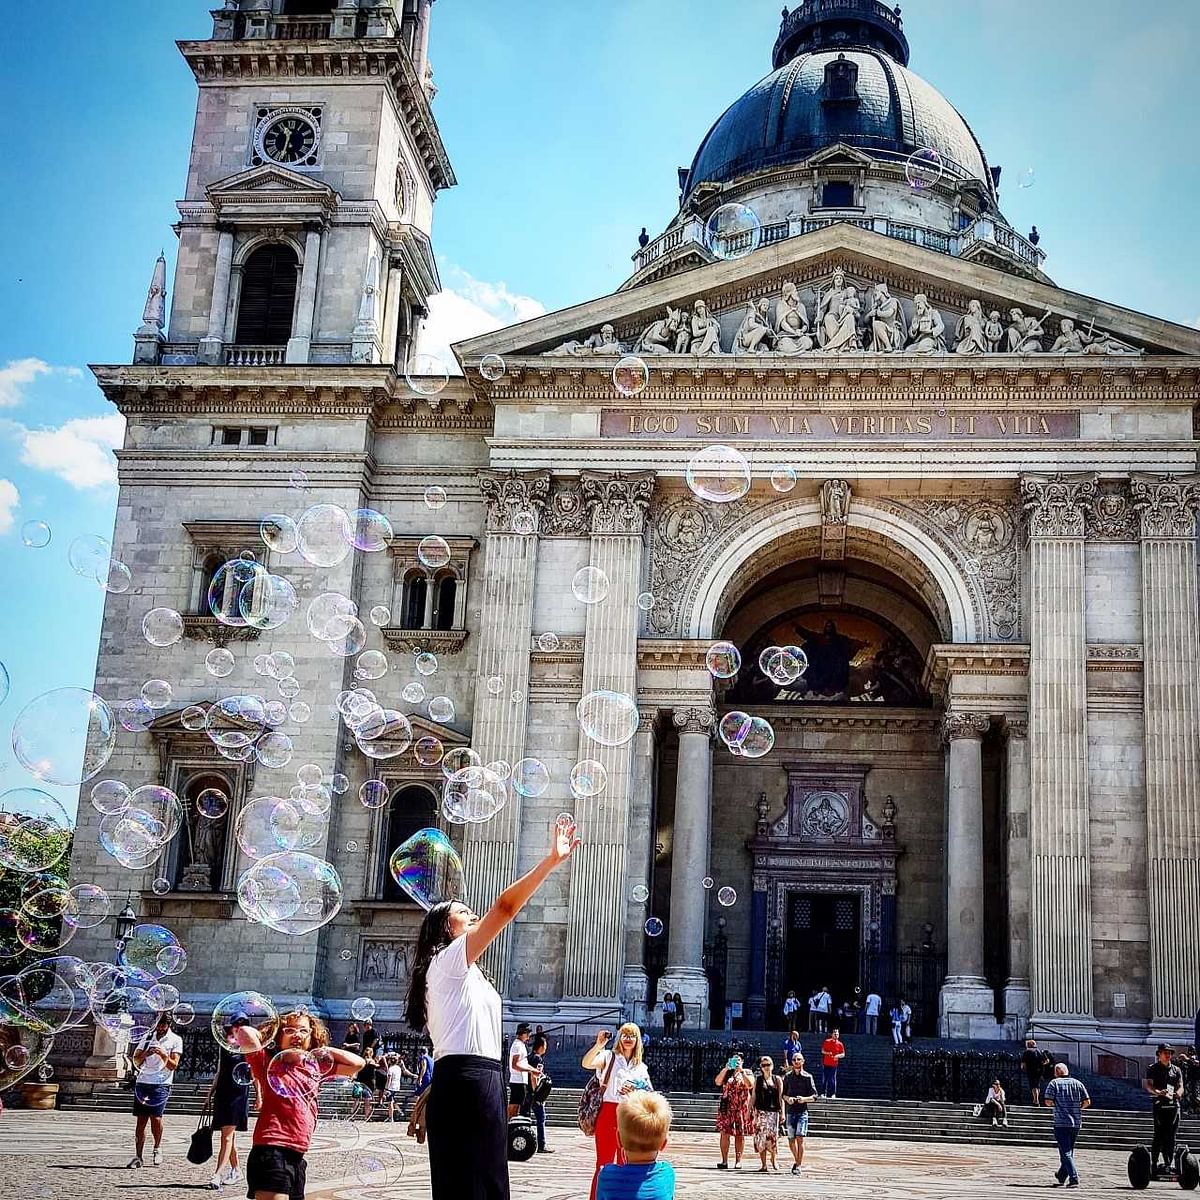 My walking tour led me through some of the city’s most historic streets and past St. Stephens, Budapest’s imposing Neo-classical Catholic church.